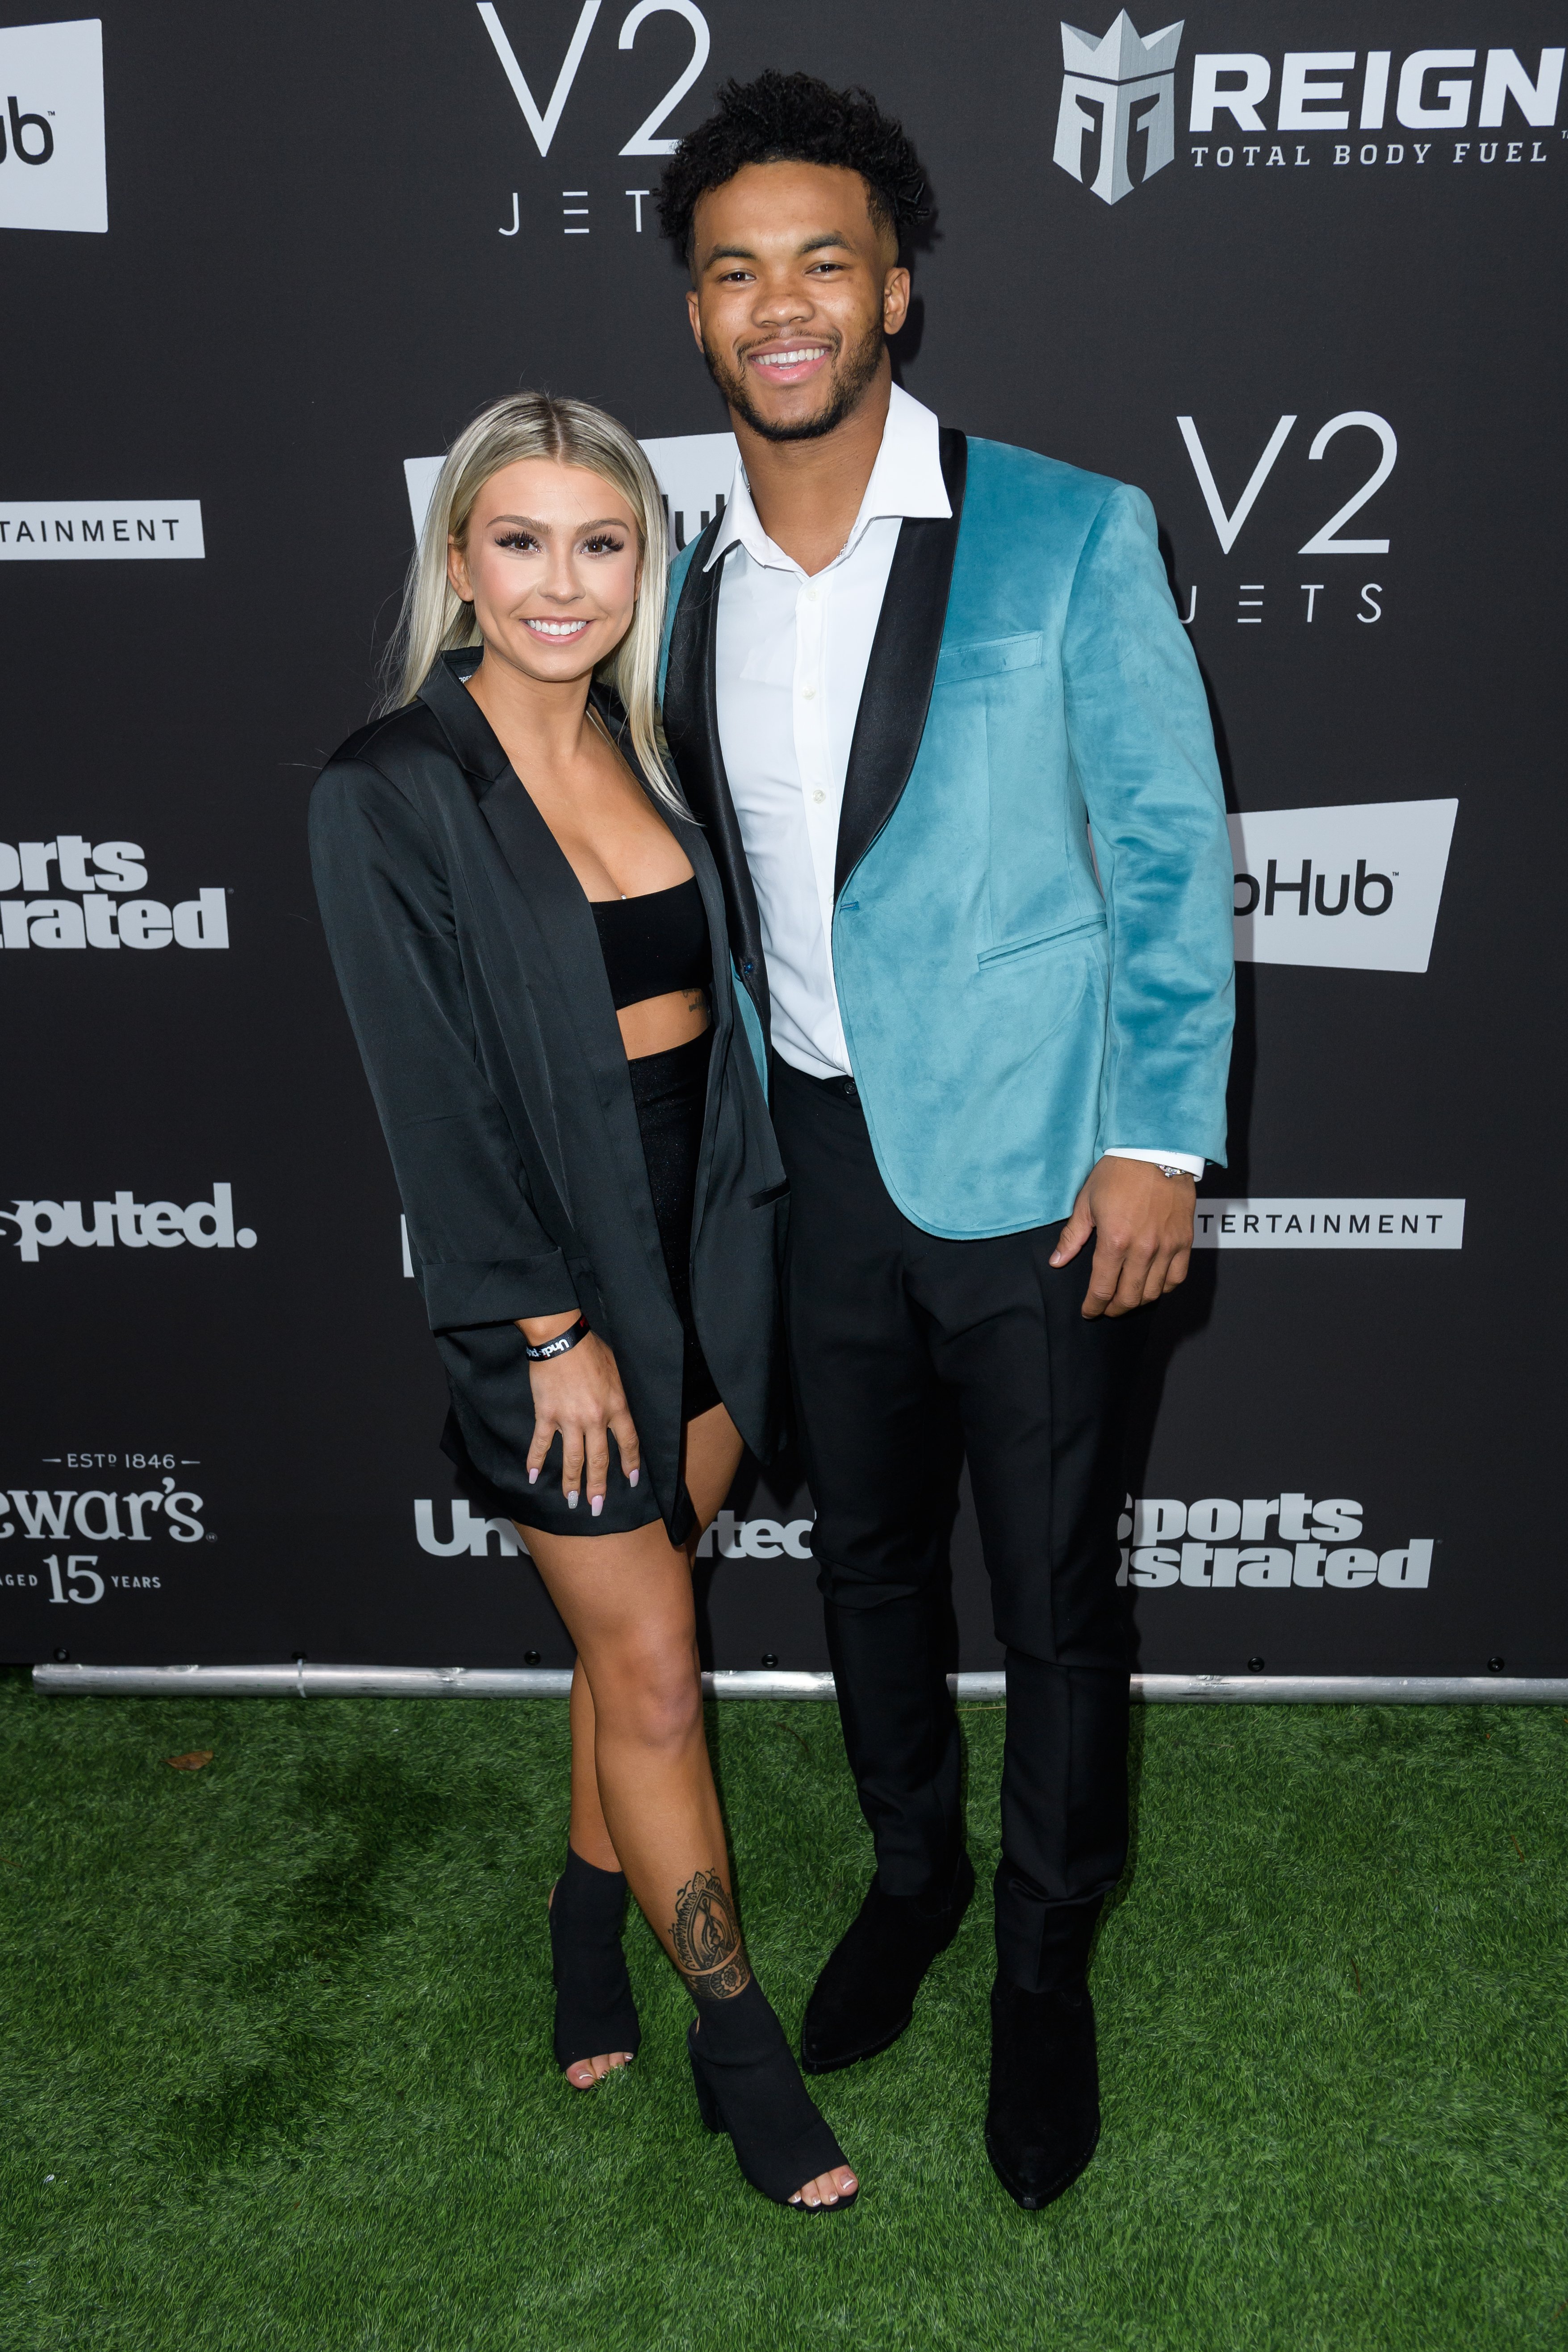 Morgan LeMasters and Kyler Murray at the Sports Illustrated Super Bowl Party in Miami, on February 1, 2020 | Source: Getty Images